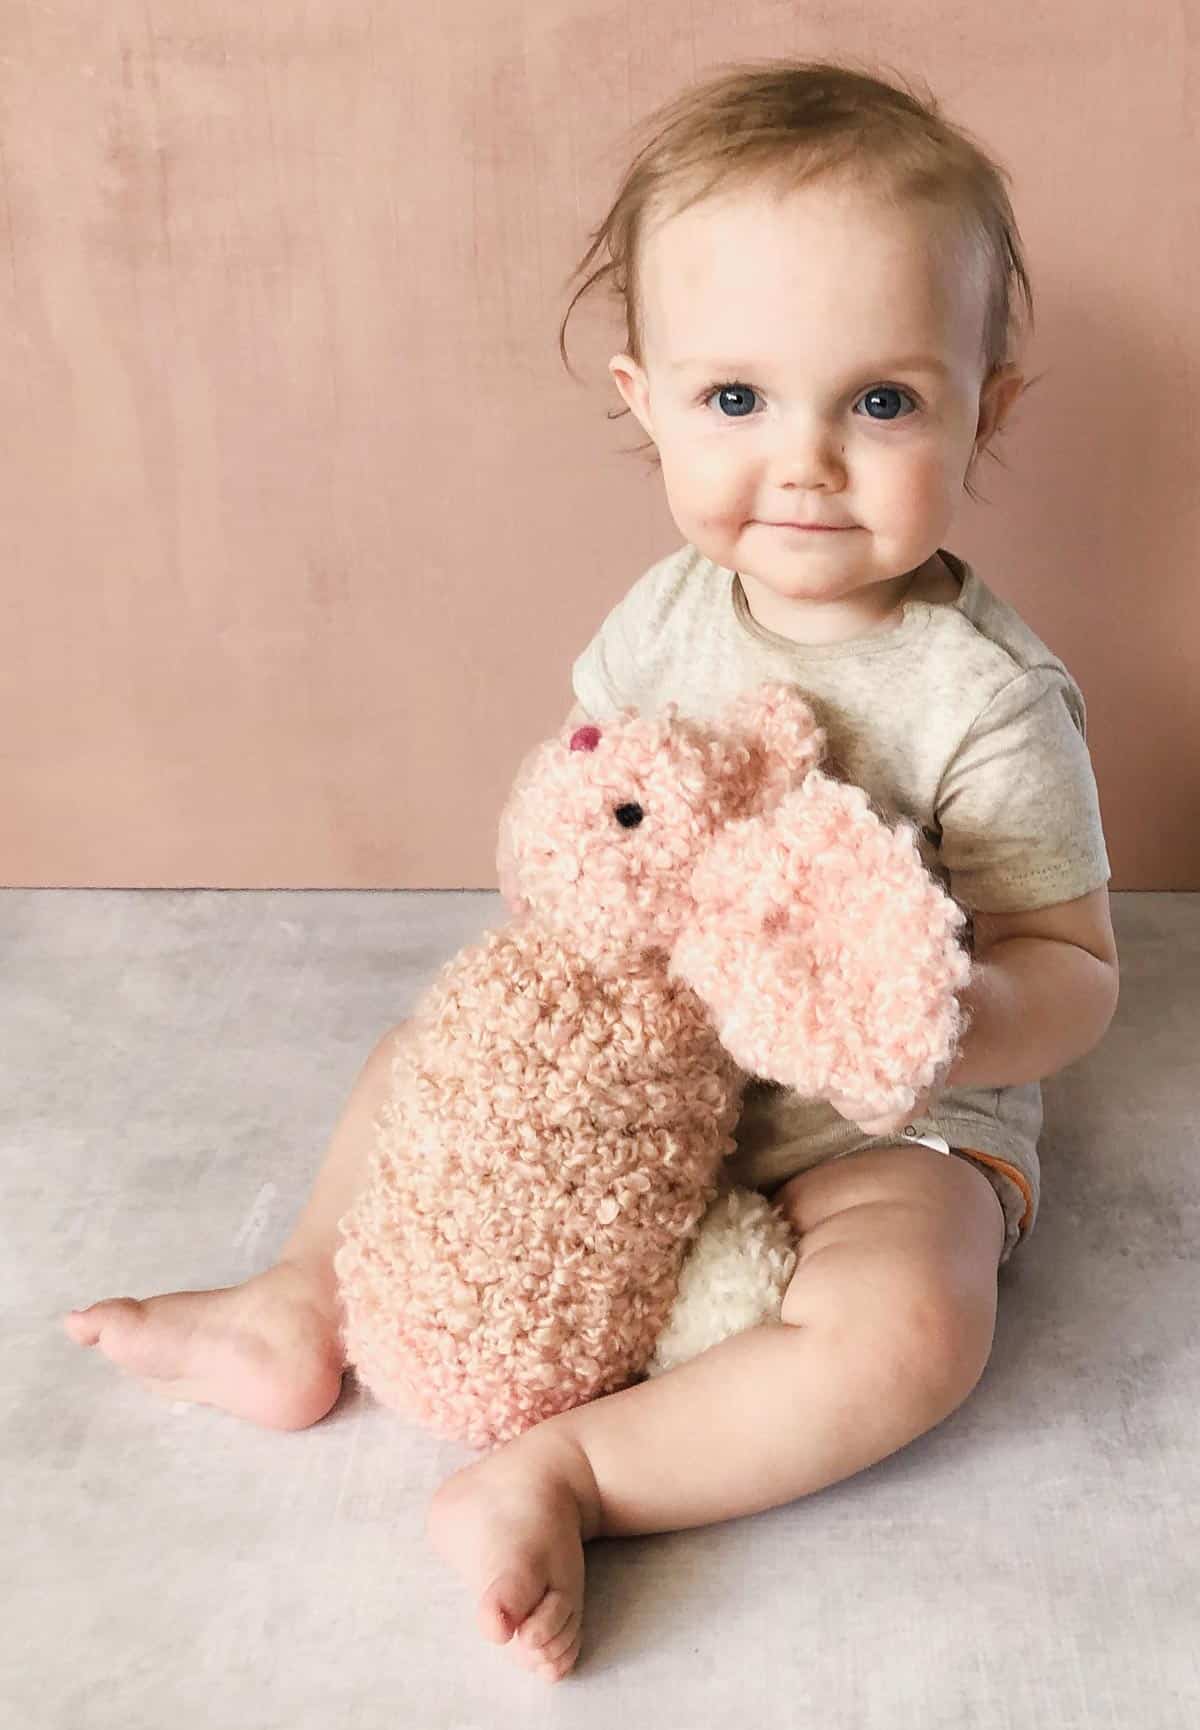 Cute baby snuggling a giant crochet bunny toy made from a square or rectangle.